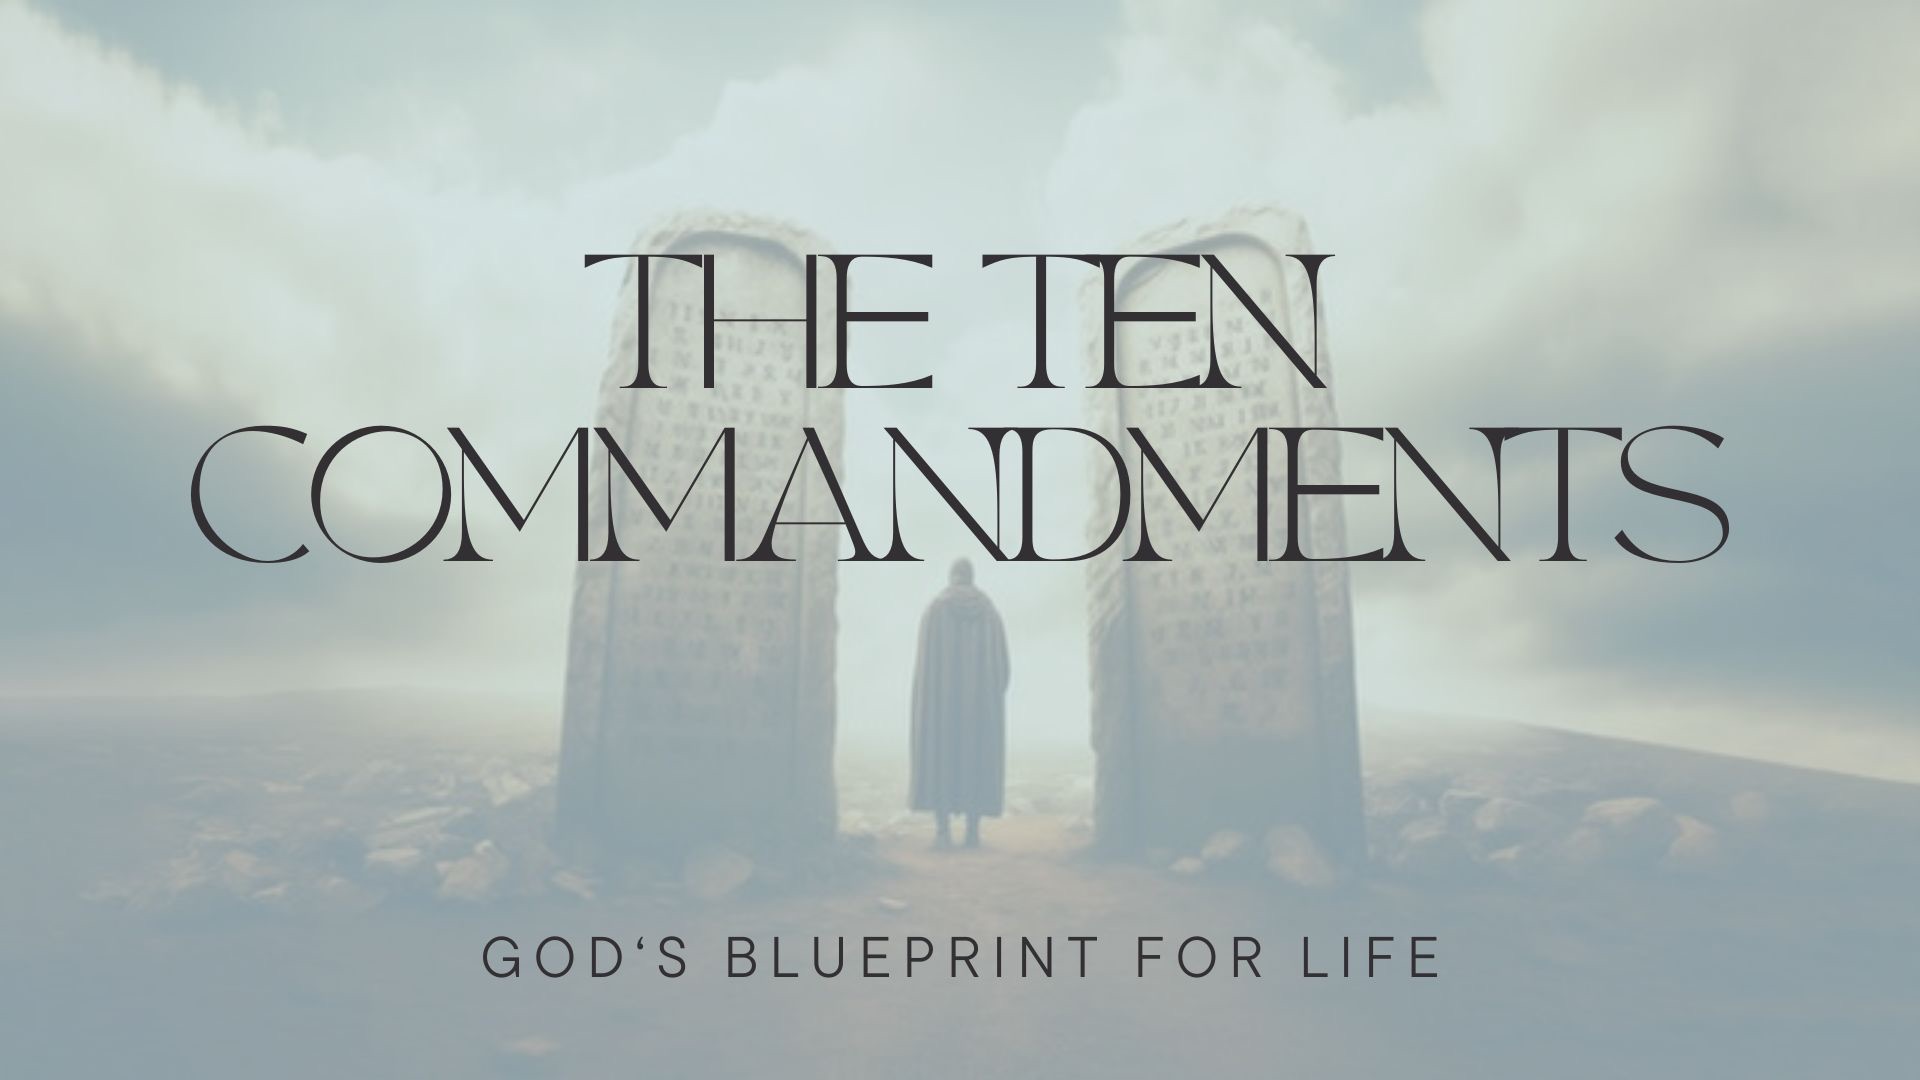 The Tenth Commandment | Do Not Covet; Soul Cancer | Psalm 72 and John 21